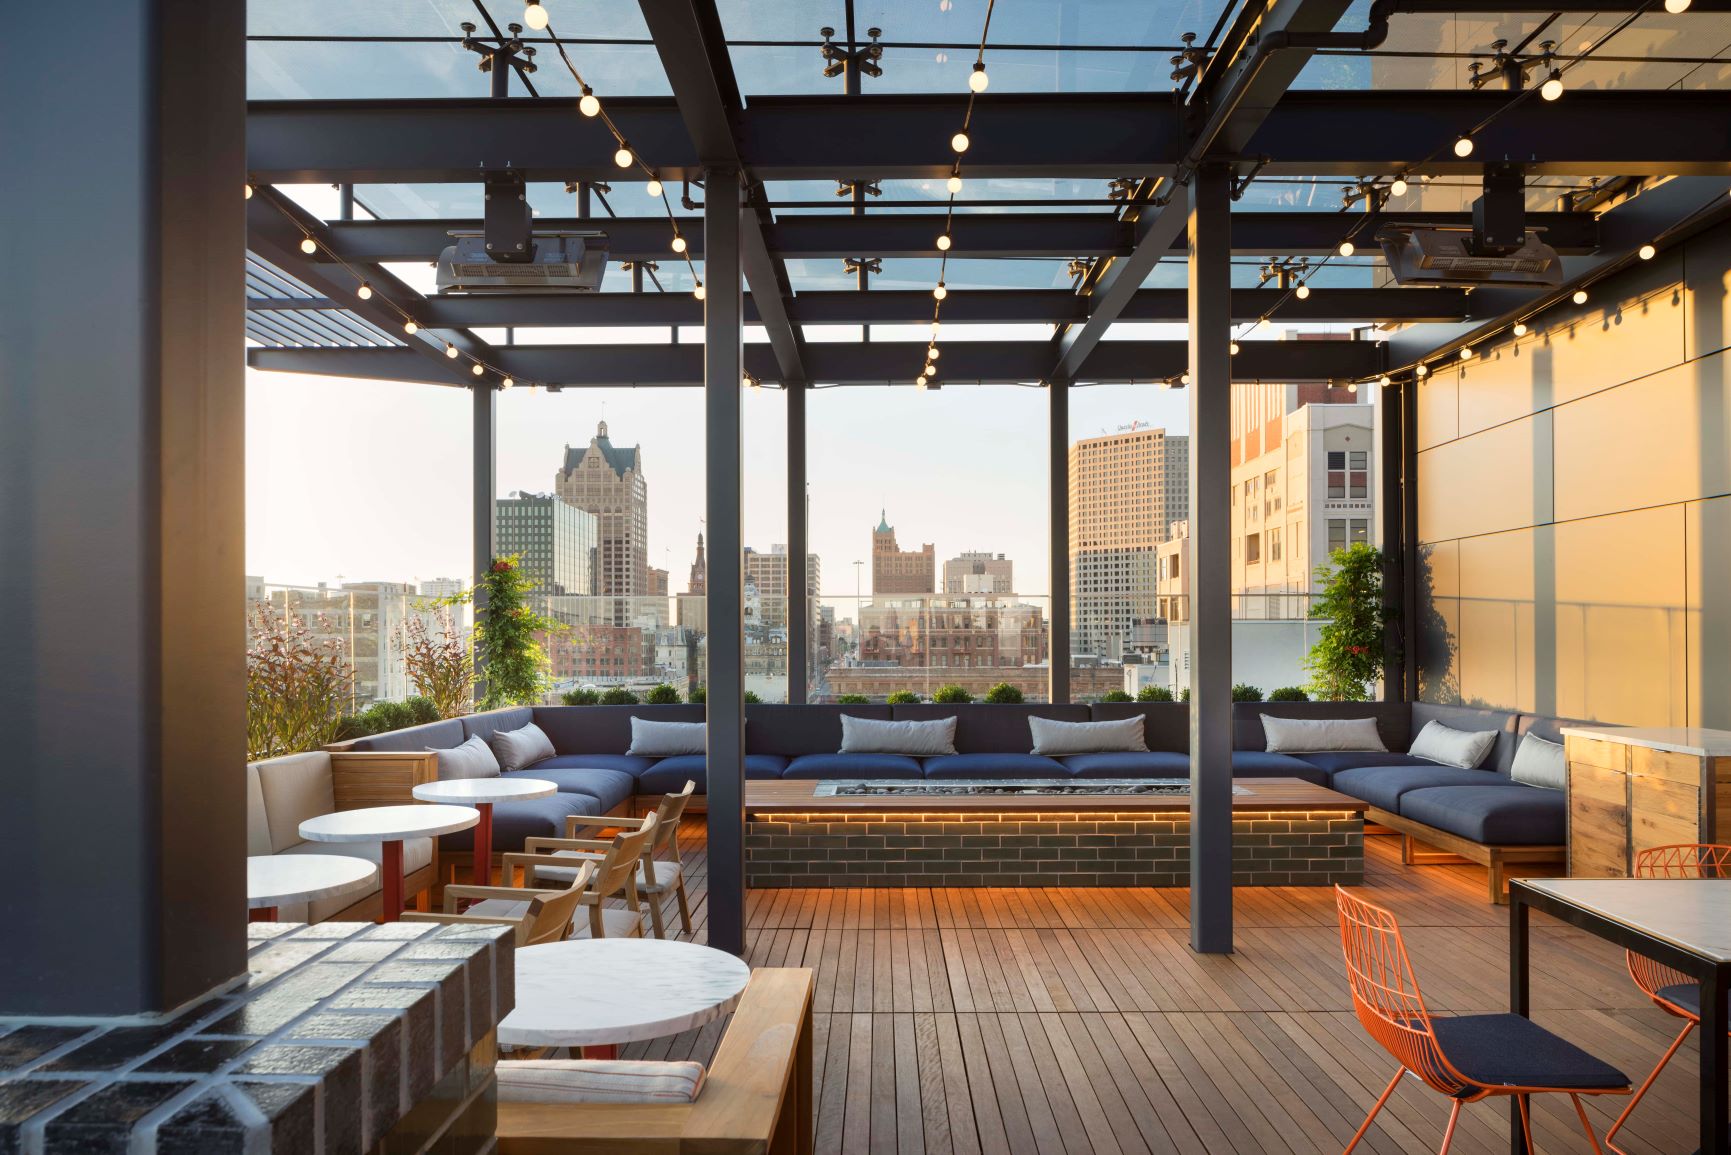 Photo: The Outsider Rooftop Bar